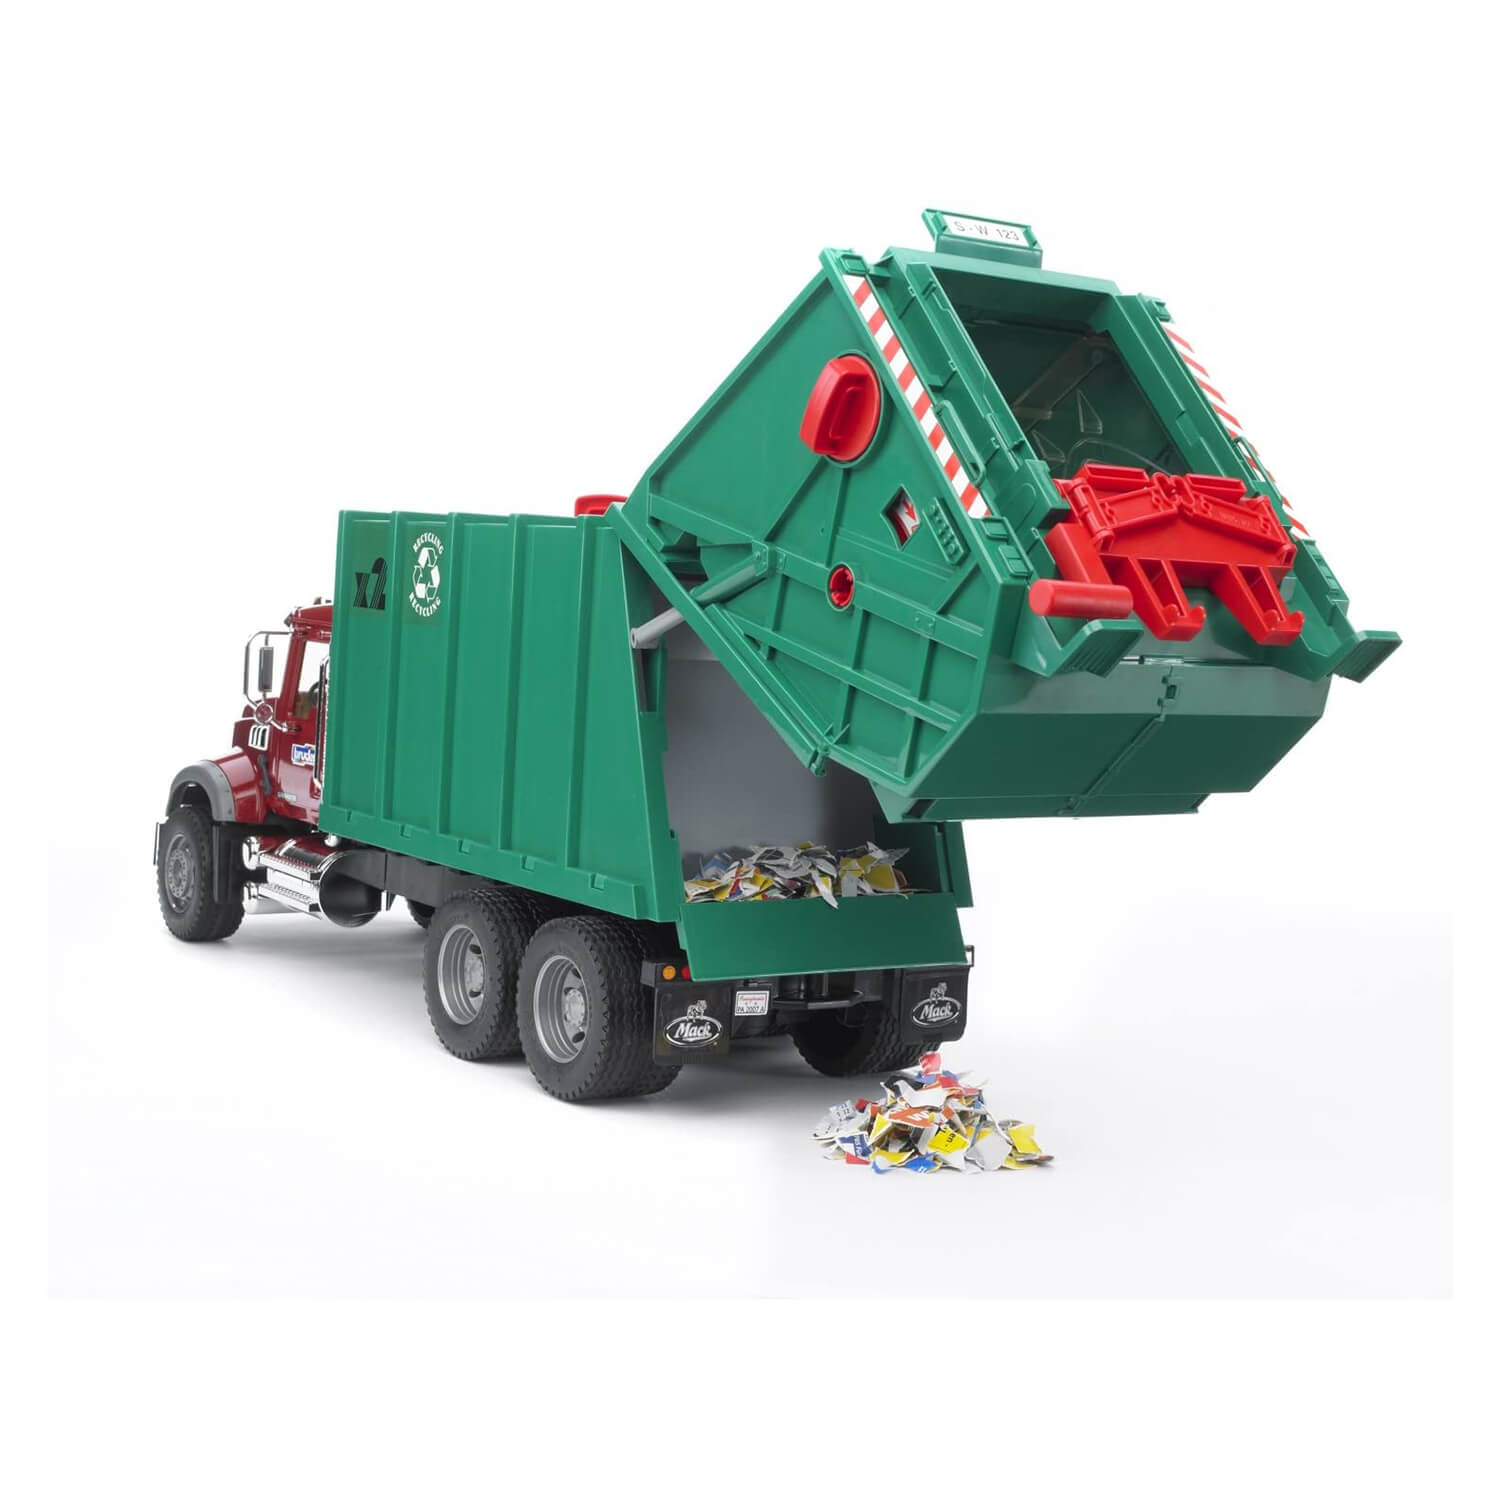 Back view of the Bruder Pro Series 1:16 Scale Mack Granite Garbage Truck Ruby Red Green.